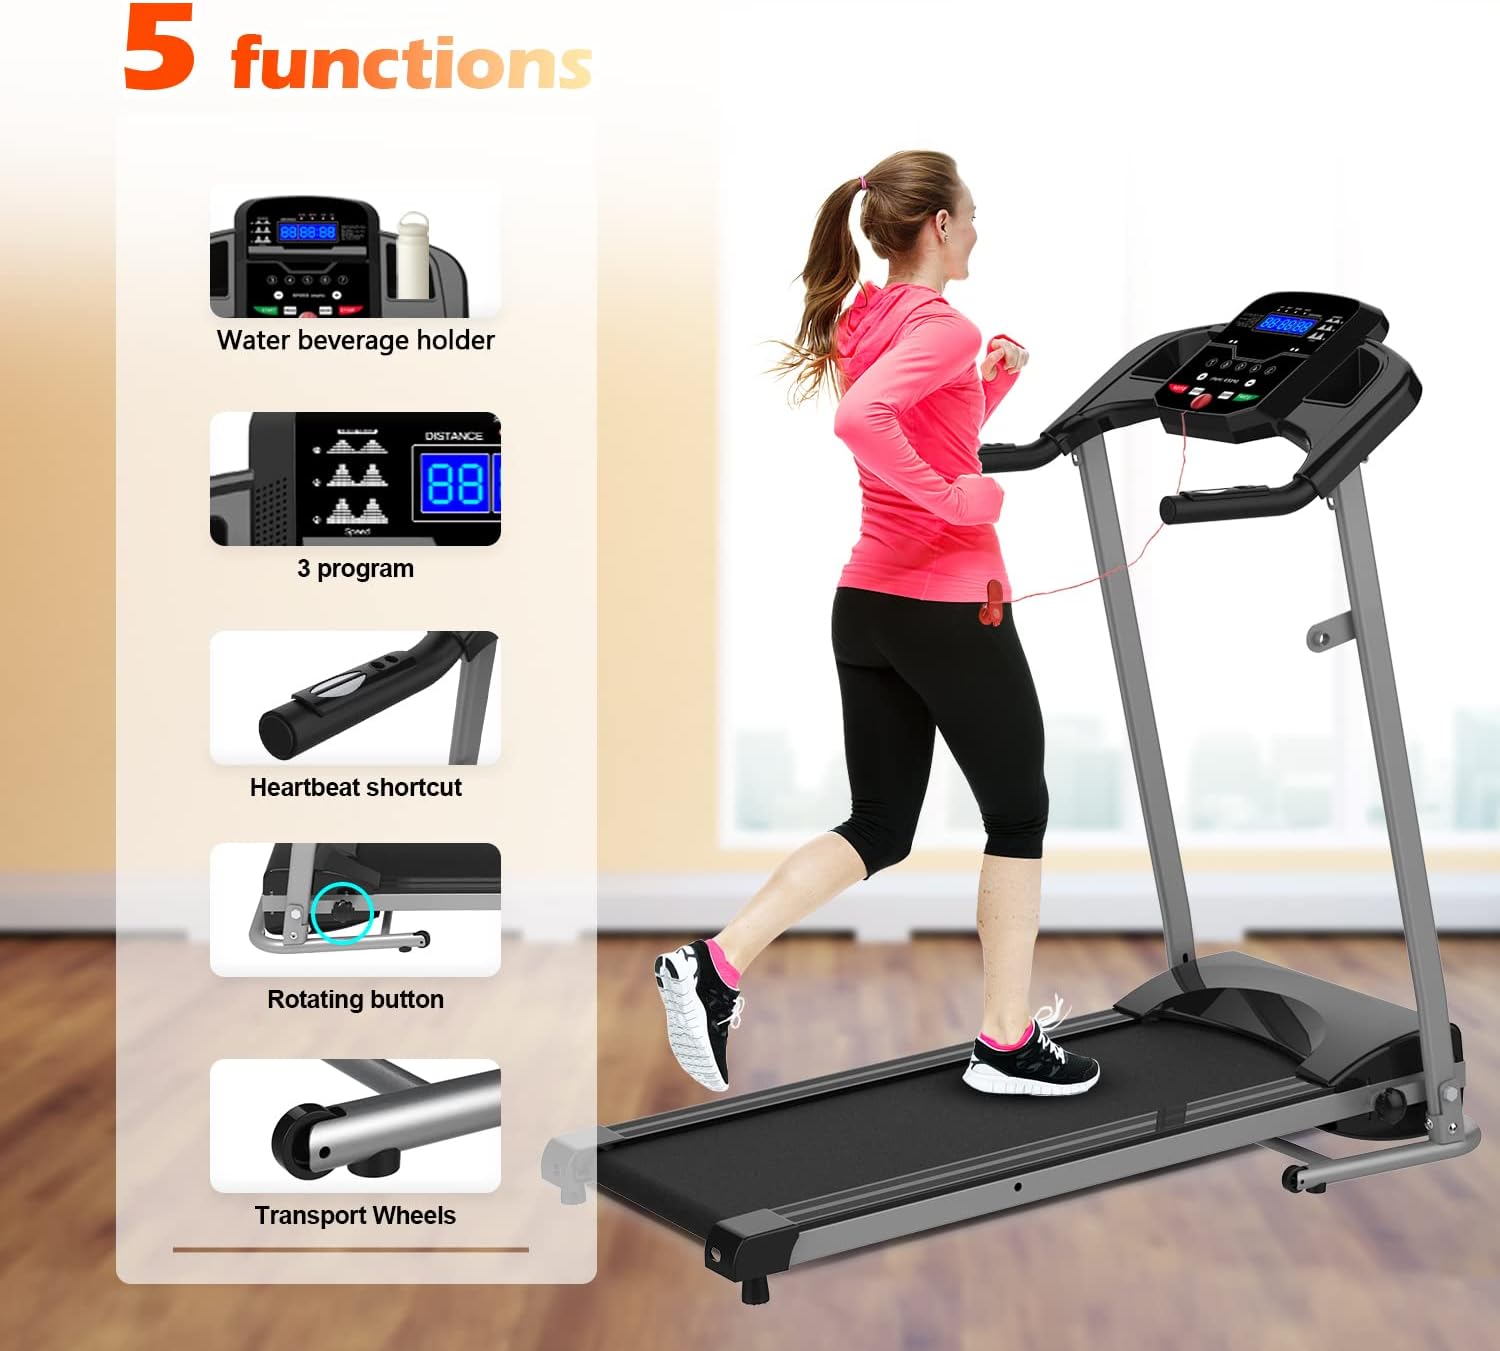 XMKEY Folding Treadmill-Walking Pad-Treadmills for Home-2.5 HP Portable Electric Foldable Treadmill with Incline Running Exercise Machine Compact Treadmill Fitness Workout Jogging Walking